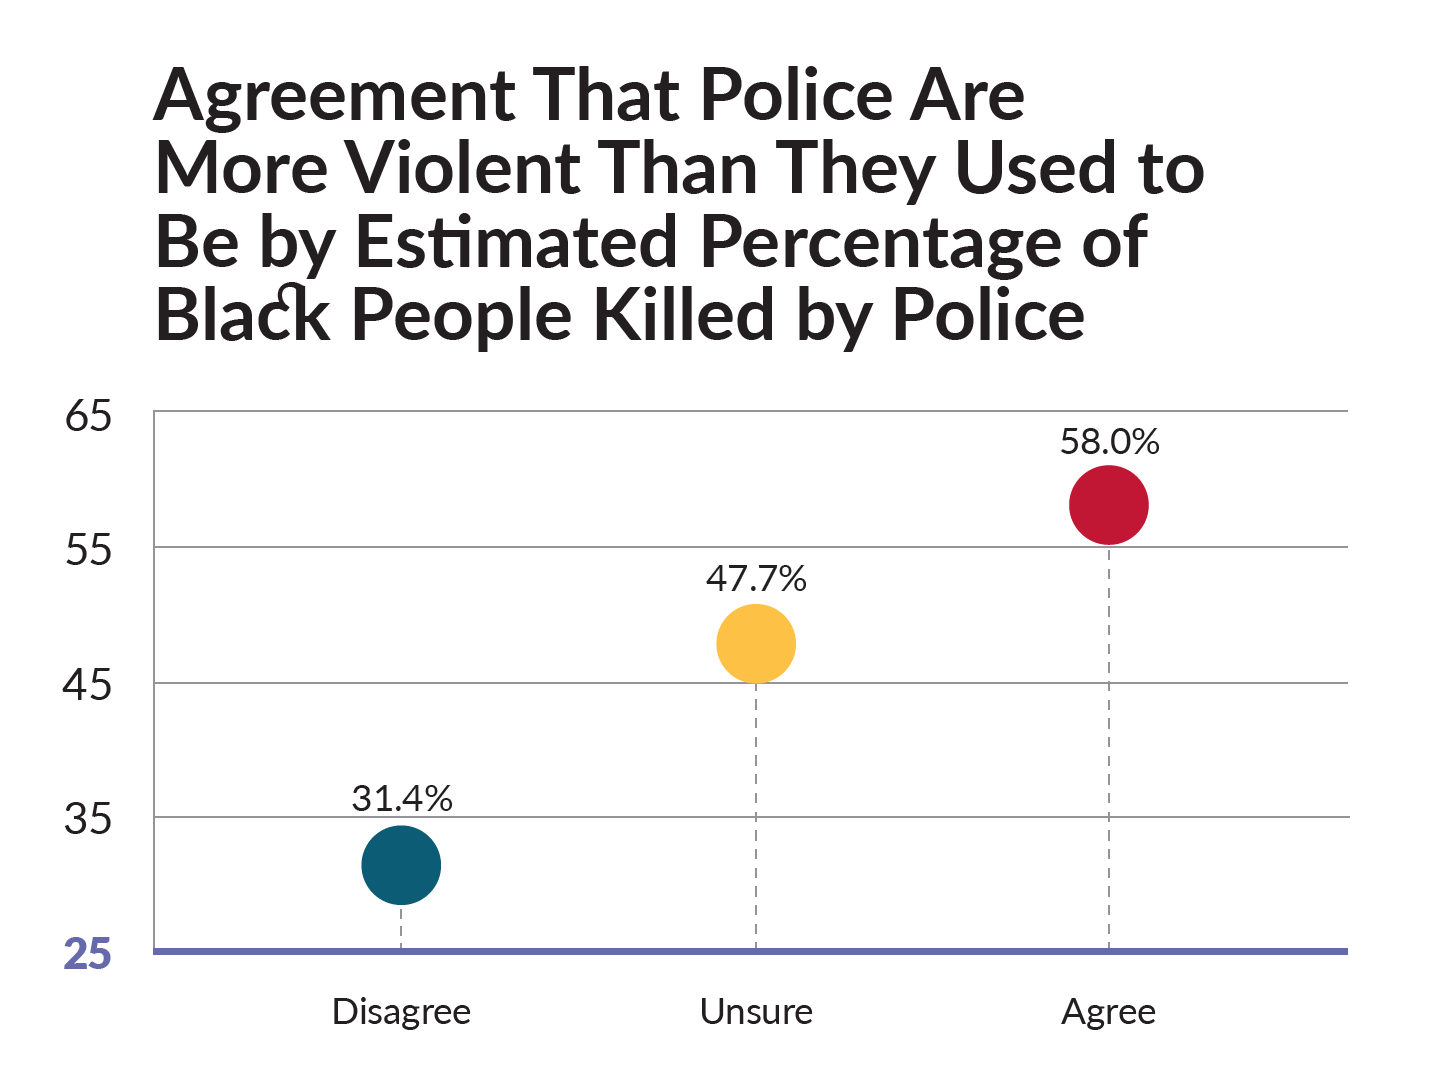 Agreement That Police Are More Violent Than They Used to Be by Estimated Percentage of Black People Killed by Police